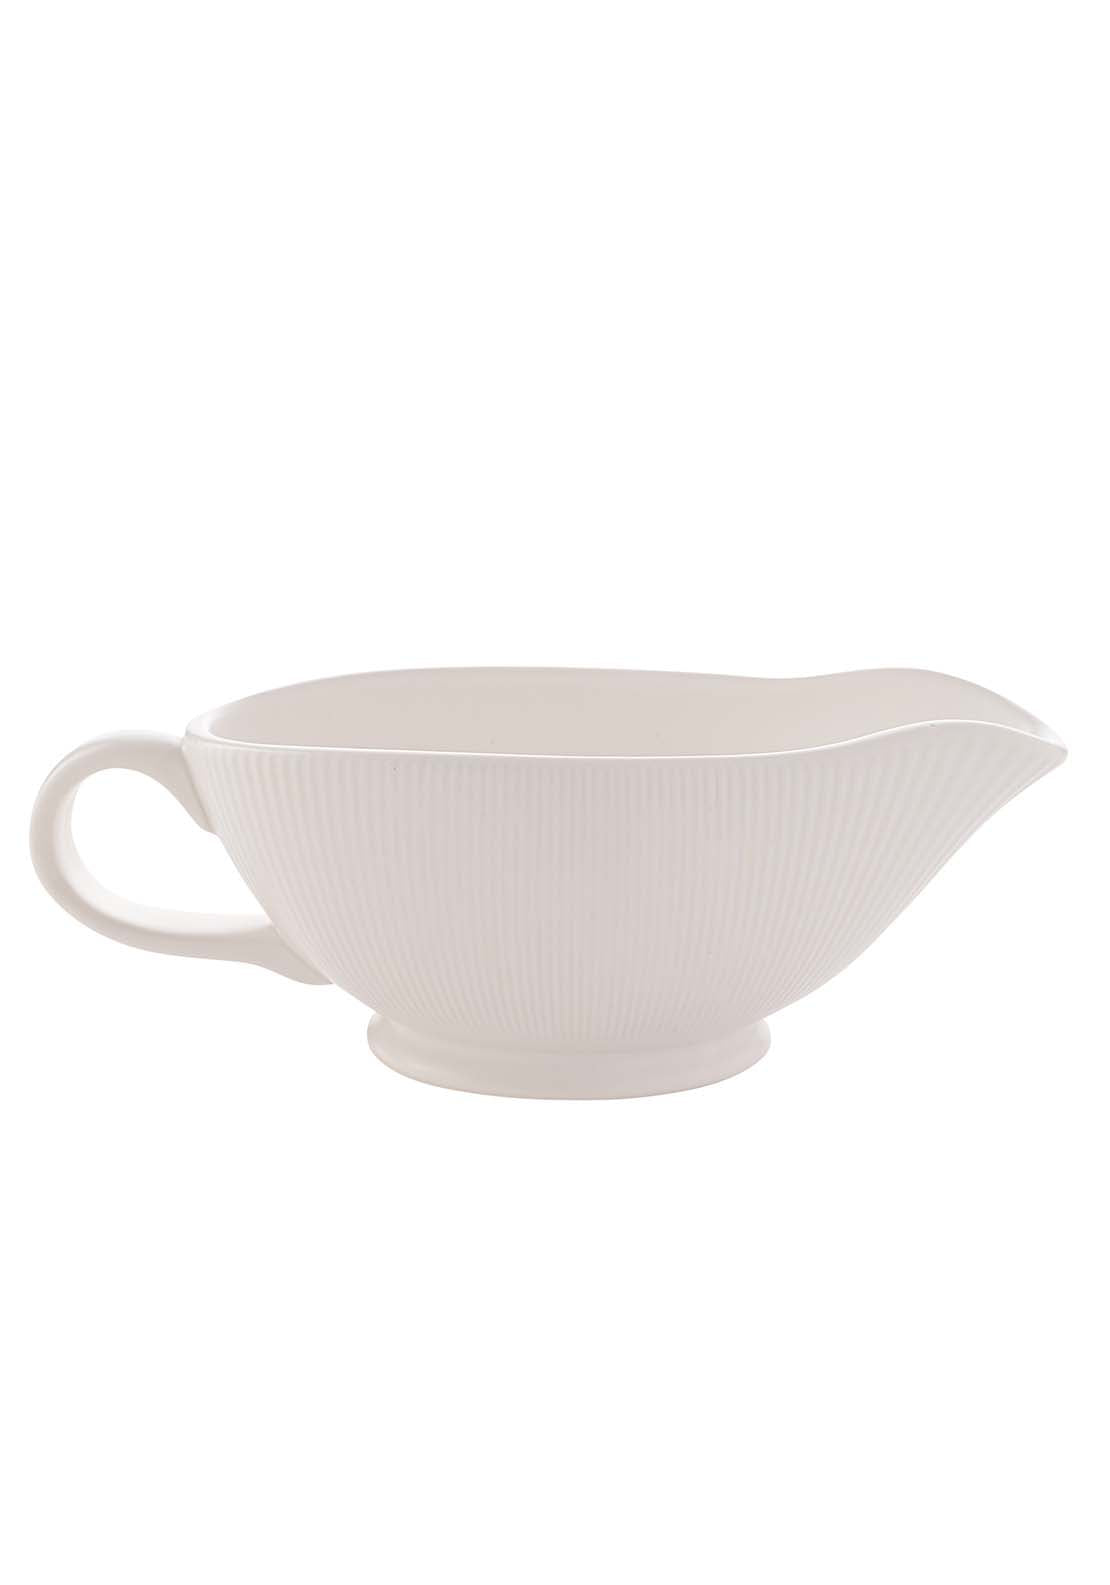 The Home Collection Ribbed Gravy Dish - White 2 Shaws Department Stores